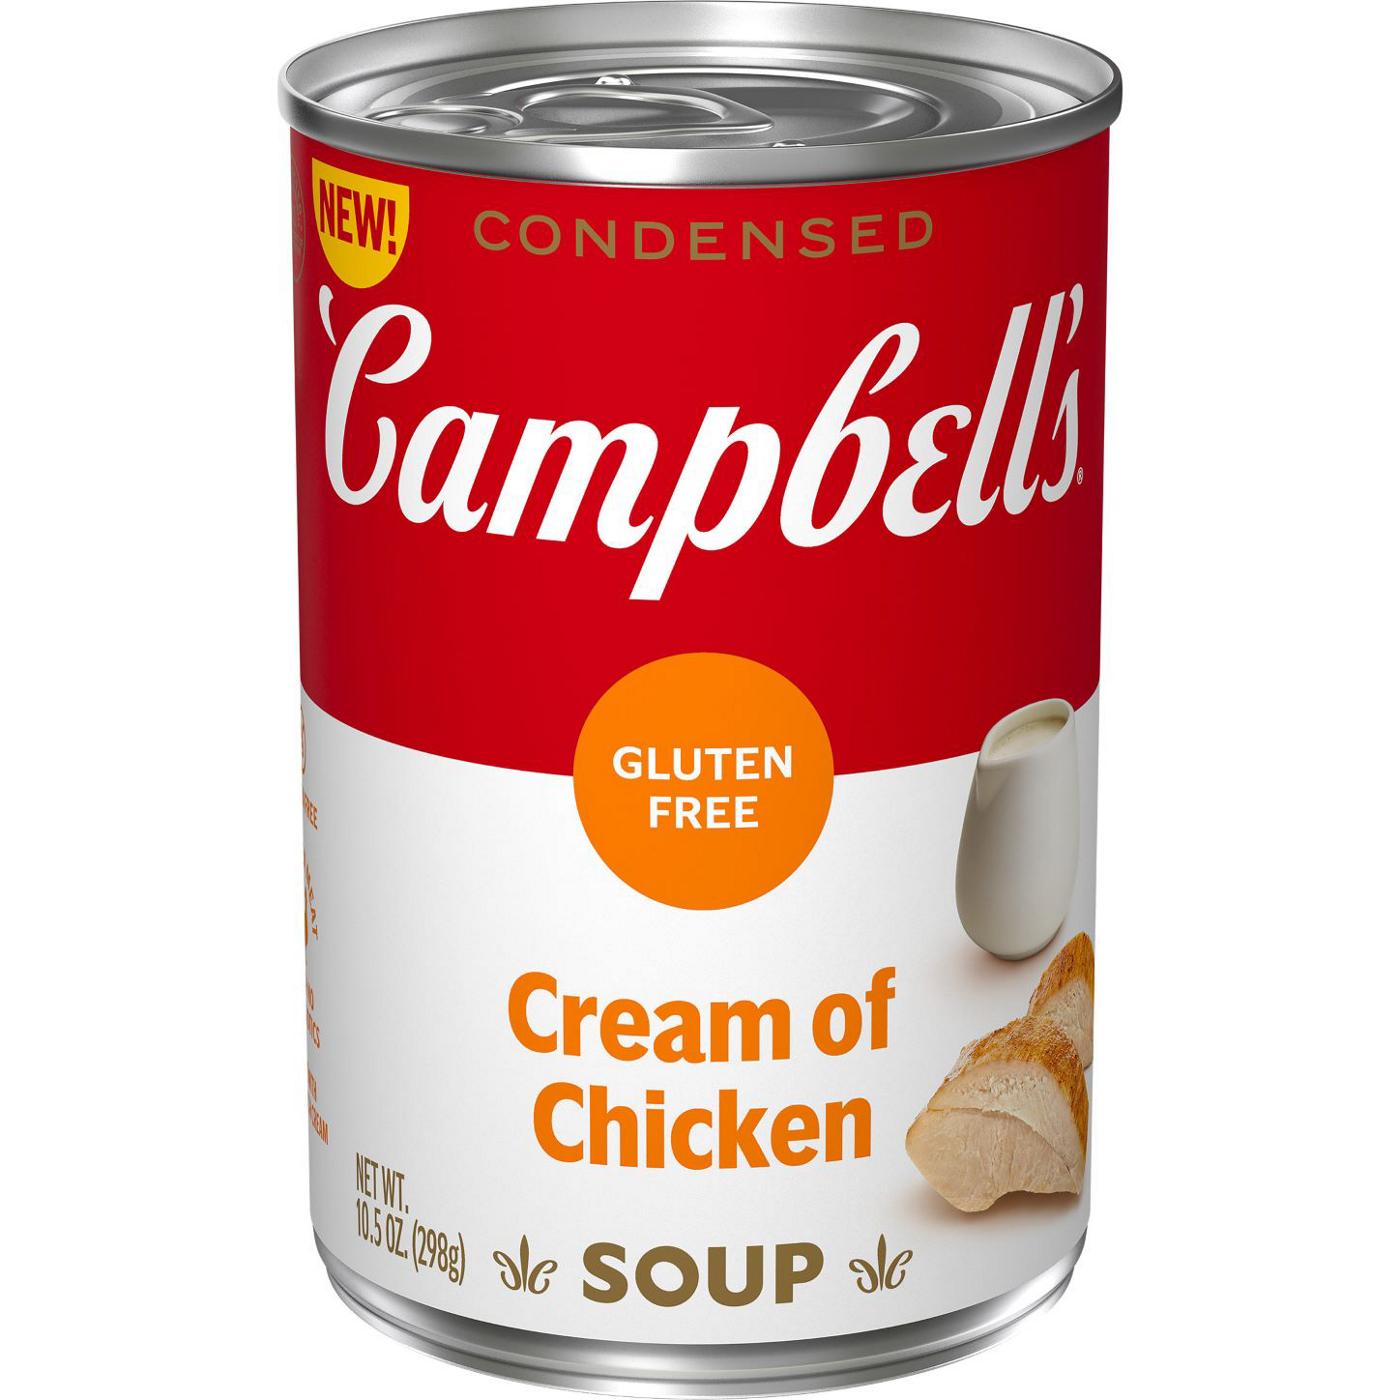 Campbells Gluten Free Cream Of Chicken Soup Shop Soups And Chili At H E B